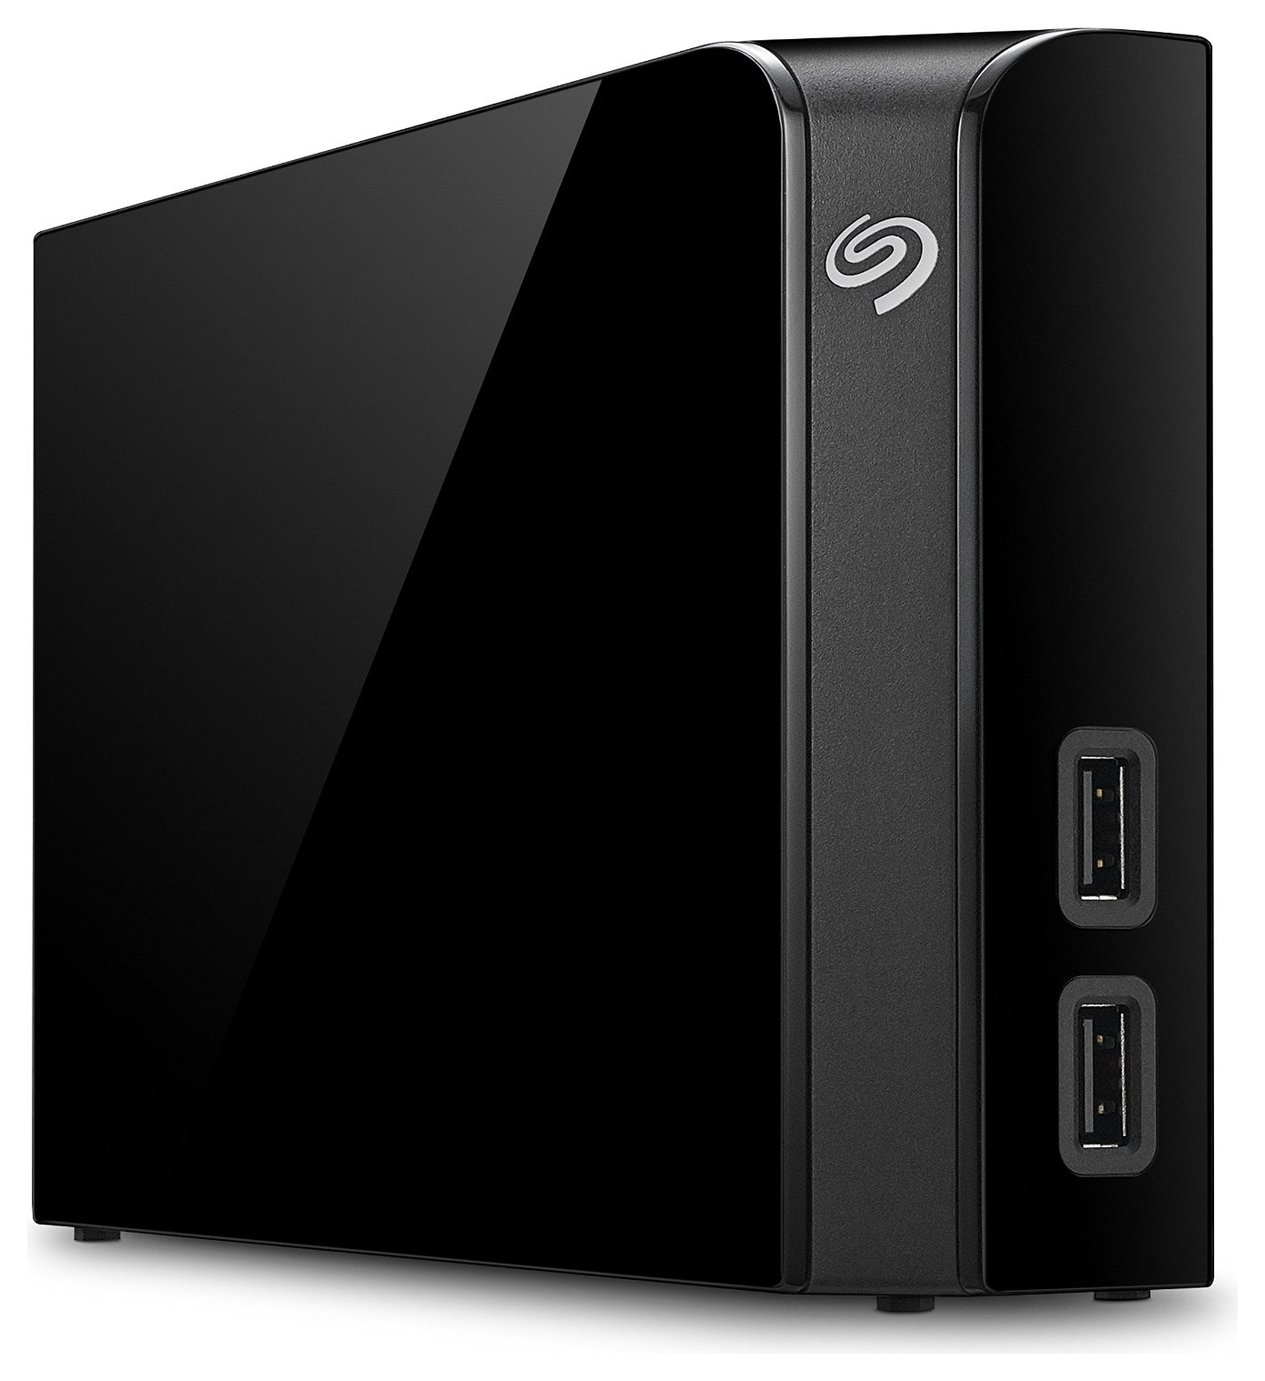 Seagate 8TB Back Up Plus Desktop Hard Drive with USB Hub review